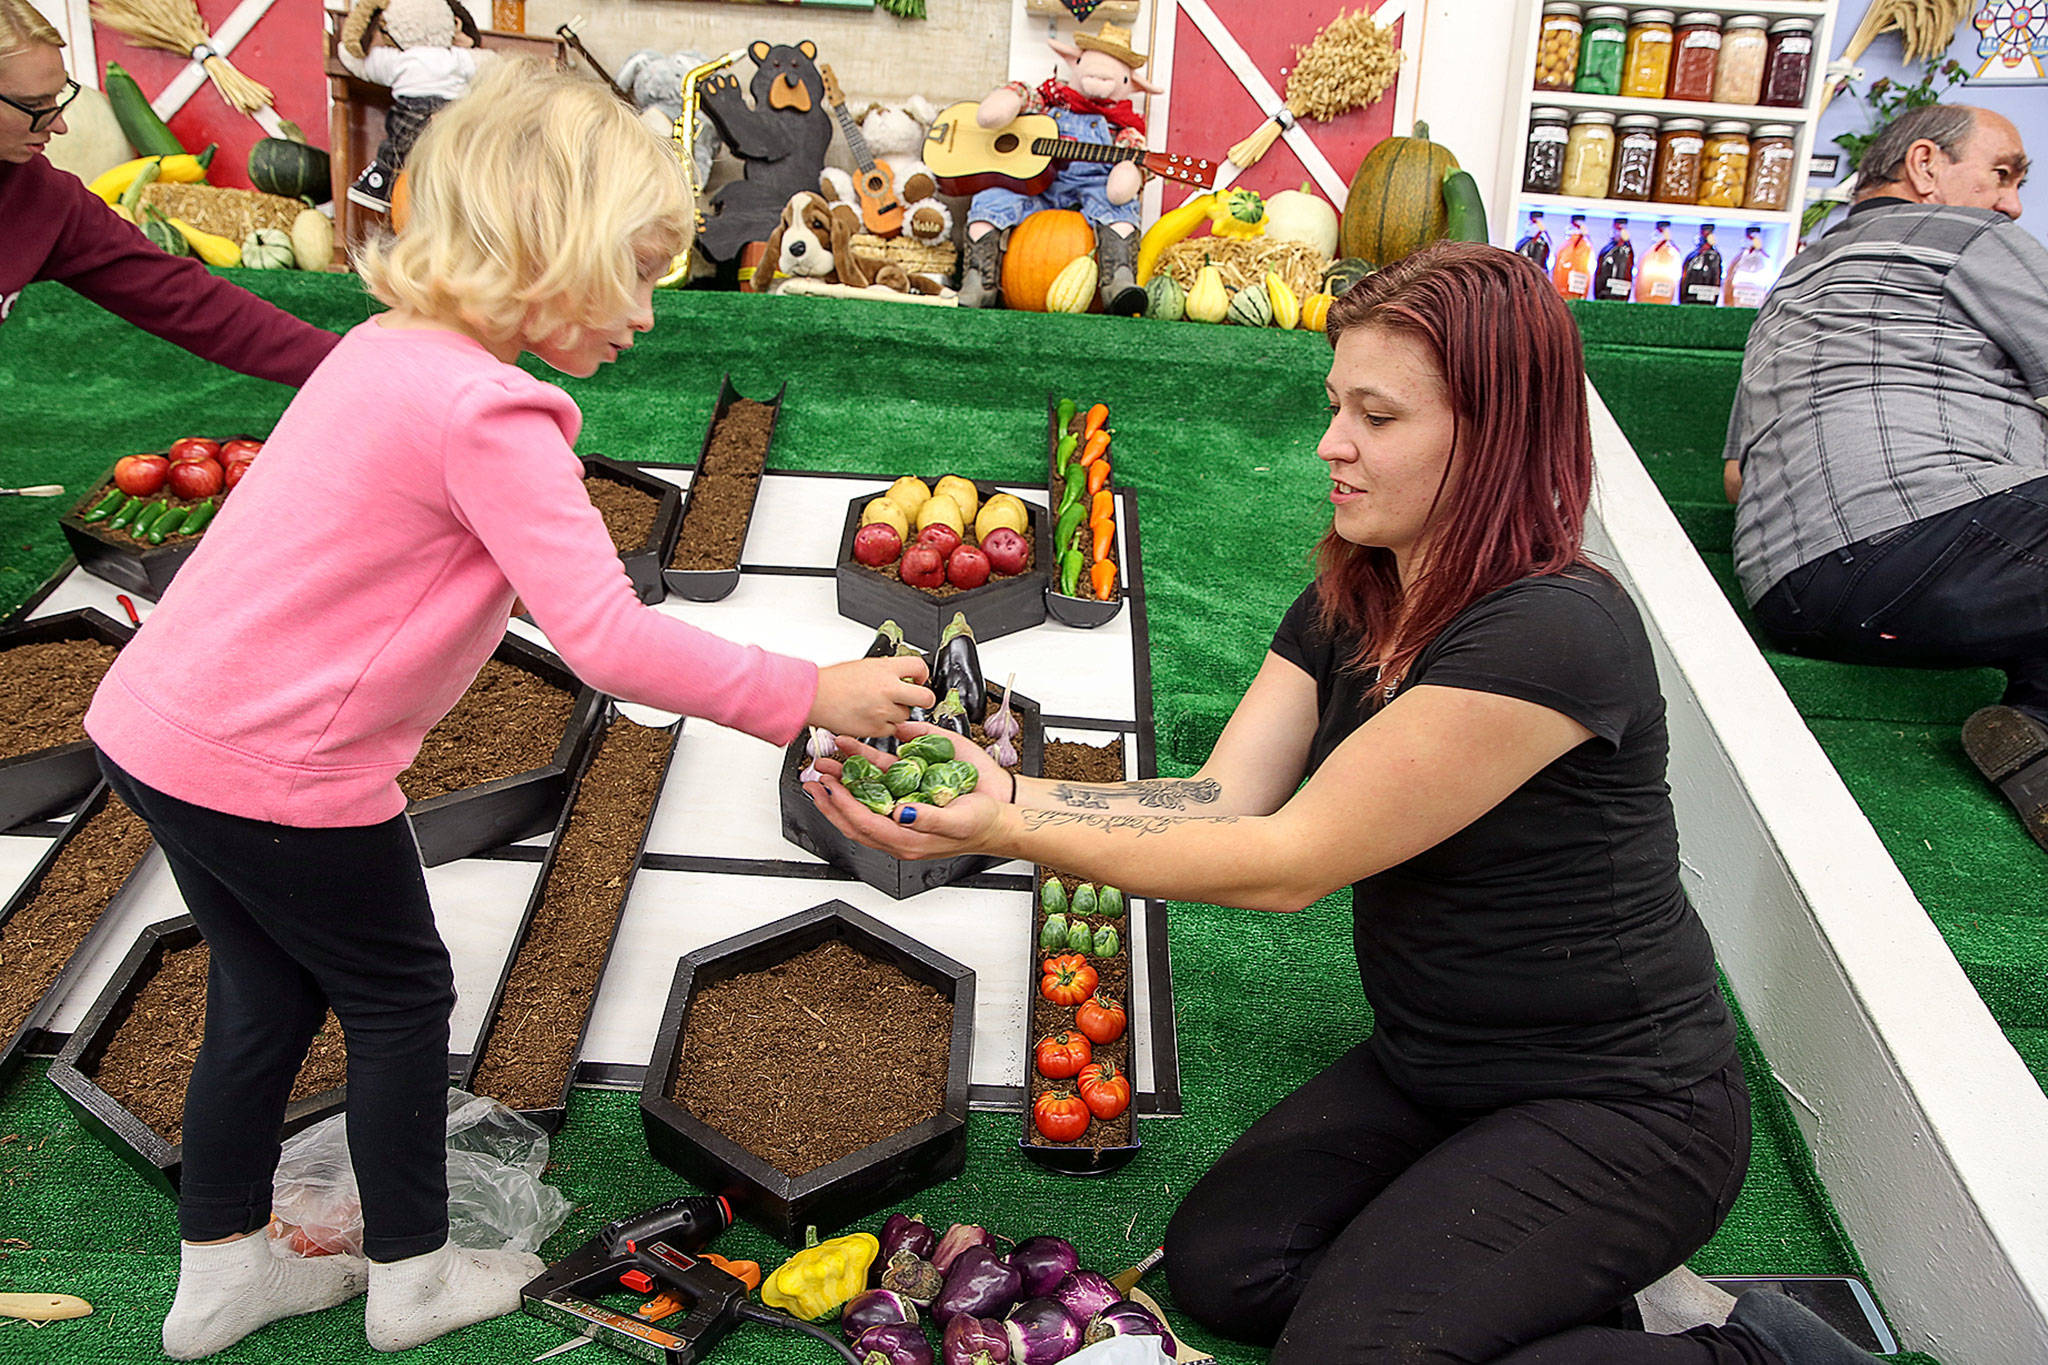 Zoe Hart handles off vegetables to her mom Nicole Hart Wednesday afternoon at the Evergreen State Fairgrounds in Monroe. (Kevin Clark / The Herald)